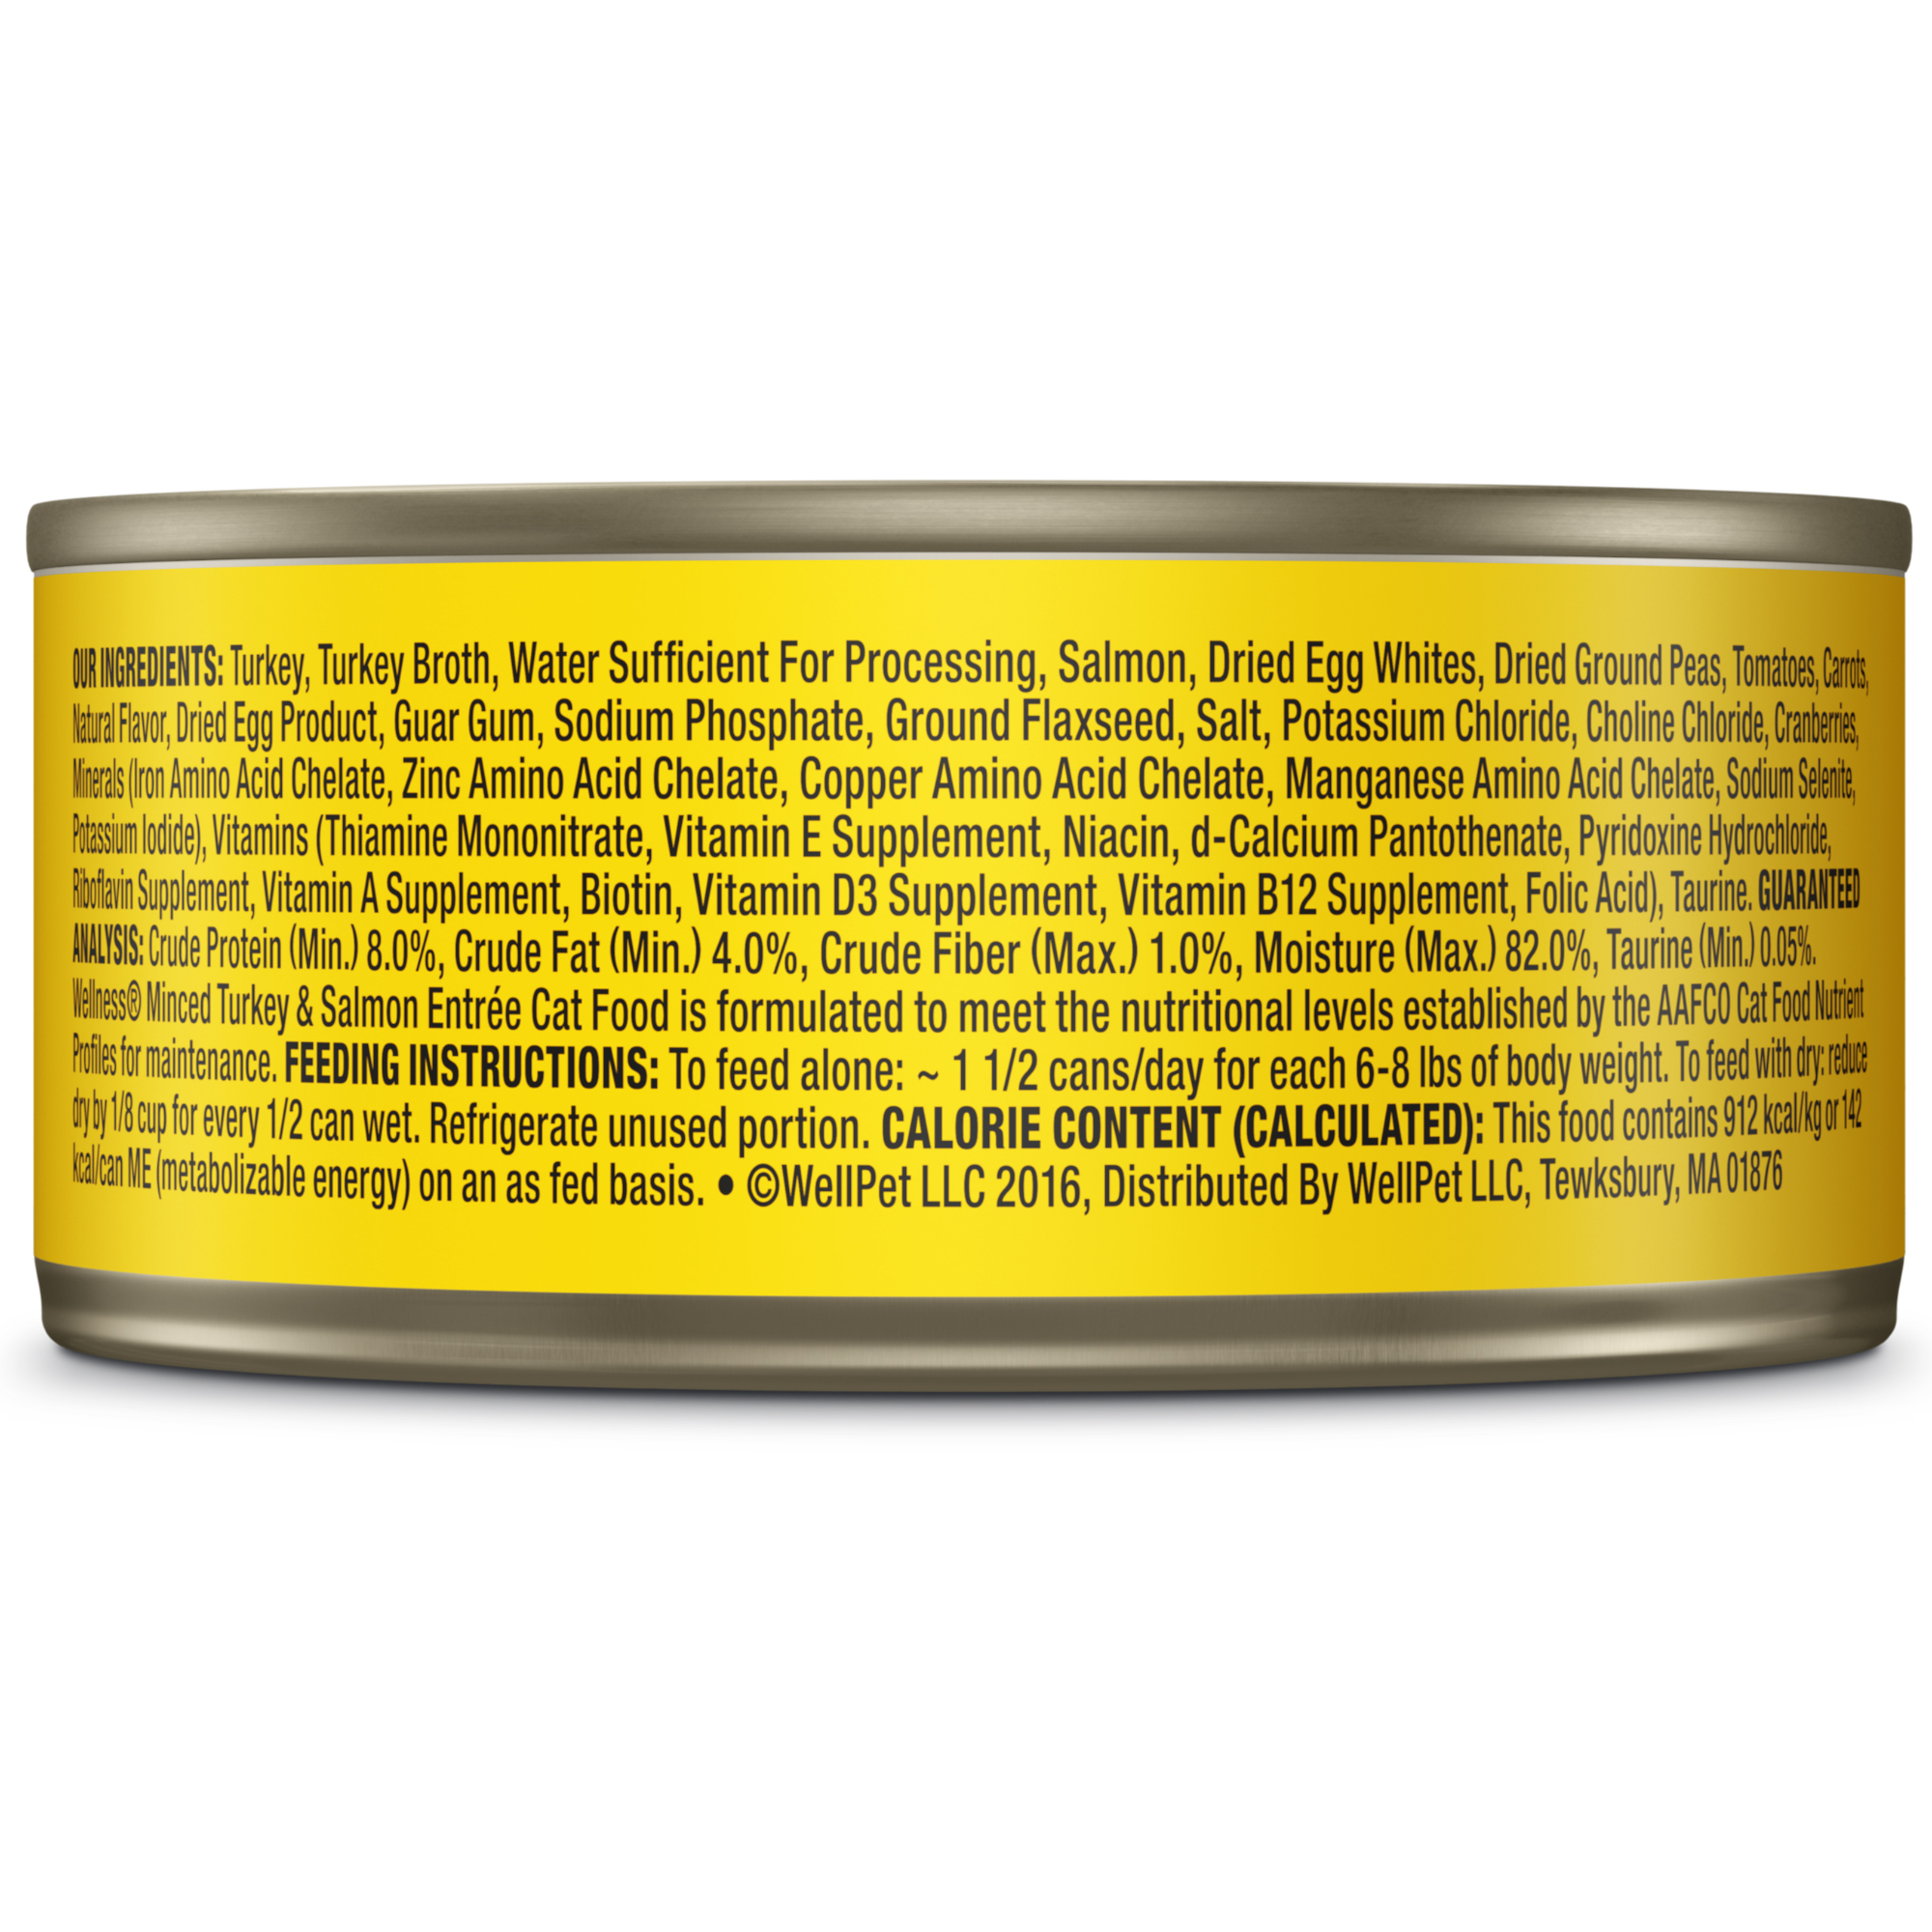 Wellness Complete Health Natural Grain Free Wet Canned Cat Food, Minced Turkey & Salmon Entree, 5.5-Ounce Can (Pack of 24) - image 3 of 8